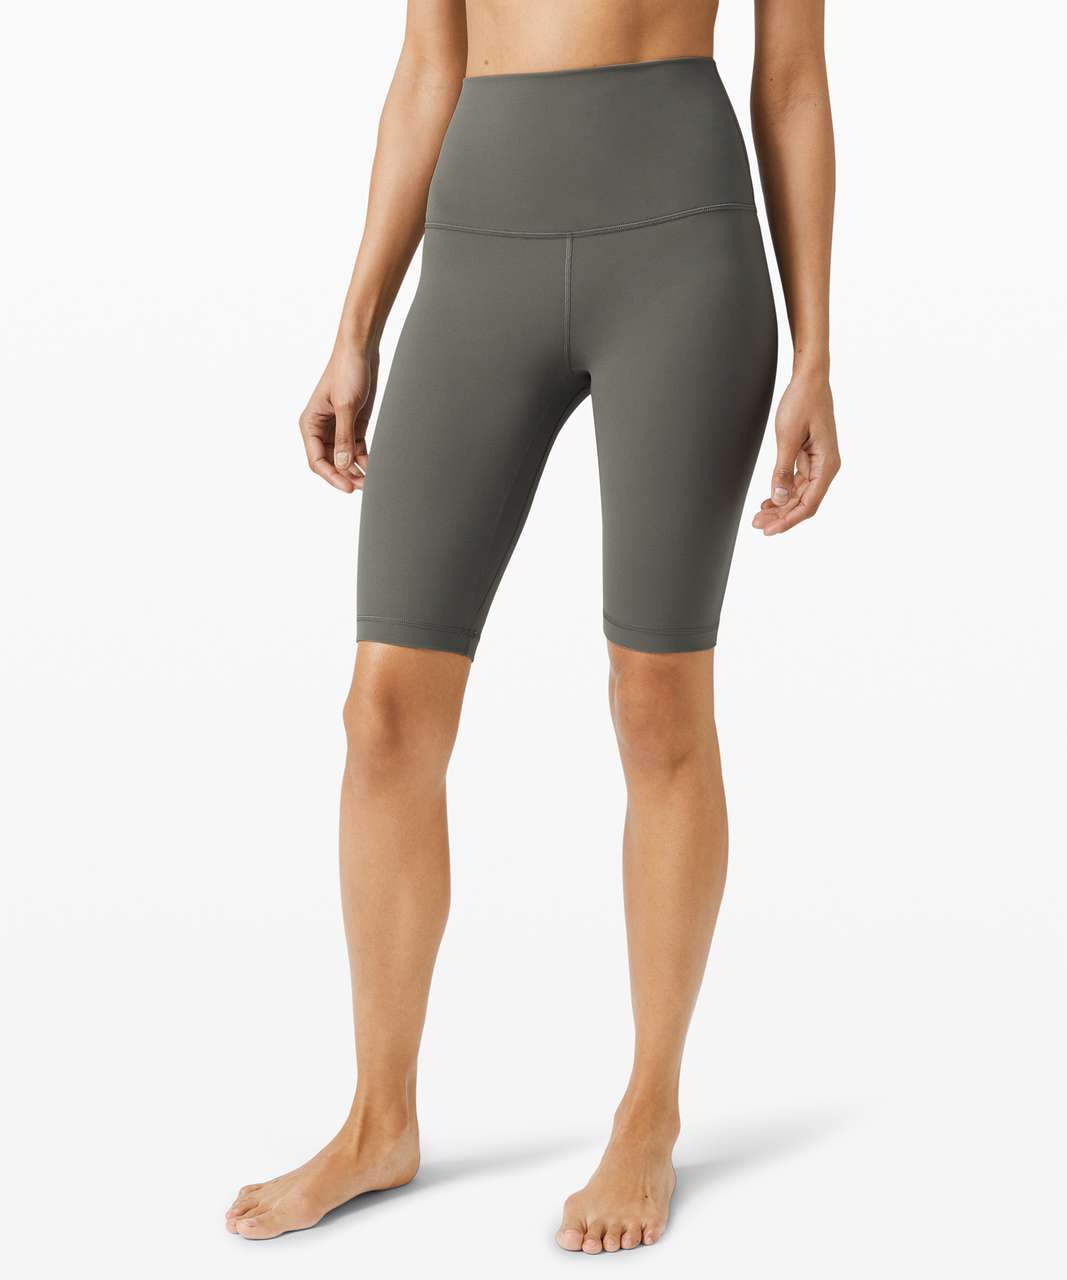 Lululemon Align Super High Rise Short *10 - Wee Are From Space Dark Carbon  Ice Grey - lulu fanatics